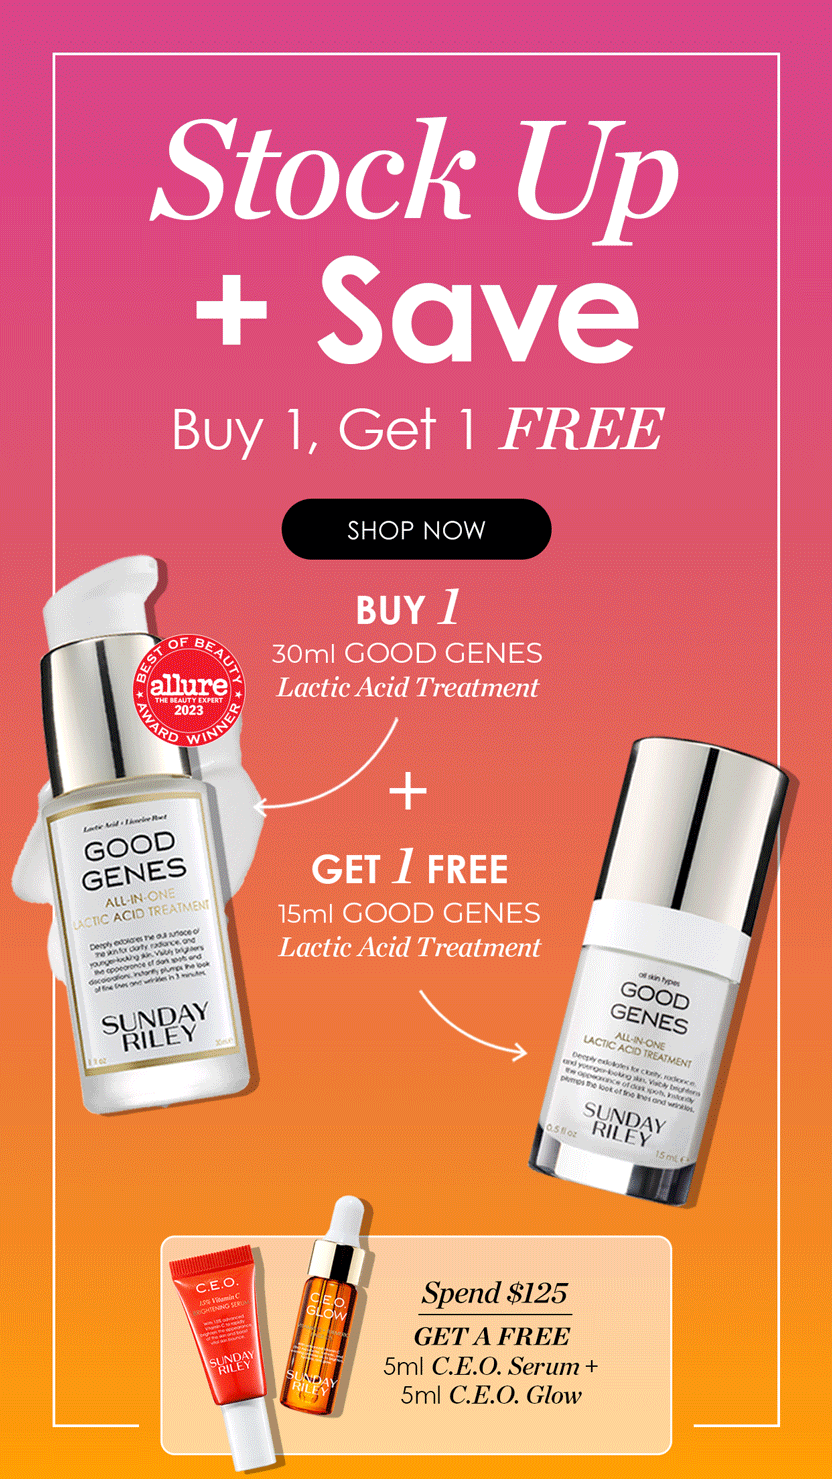 stock up and save. Buy 1, Get 1 Free on select items while supplies last